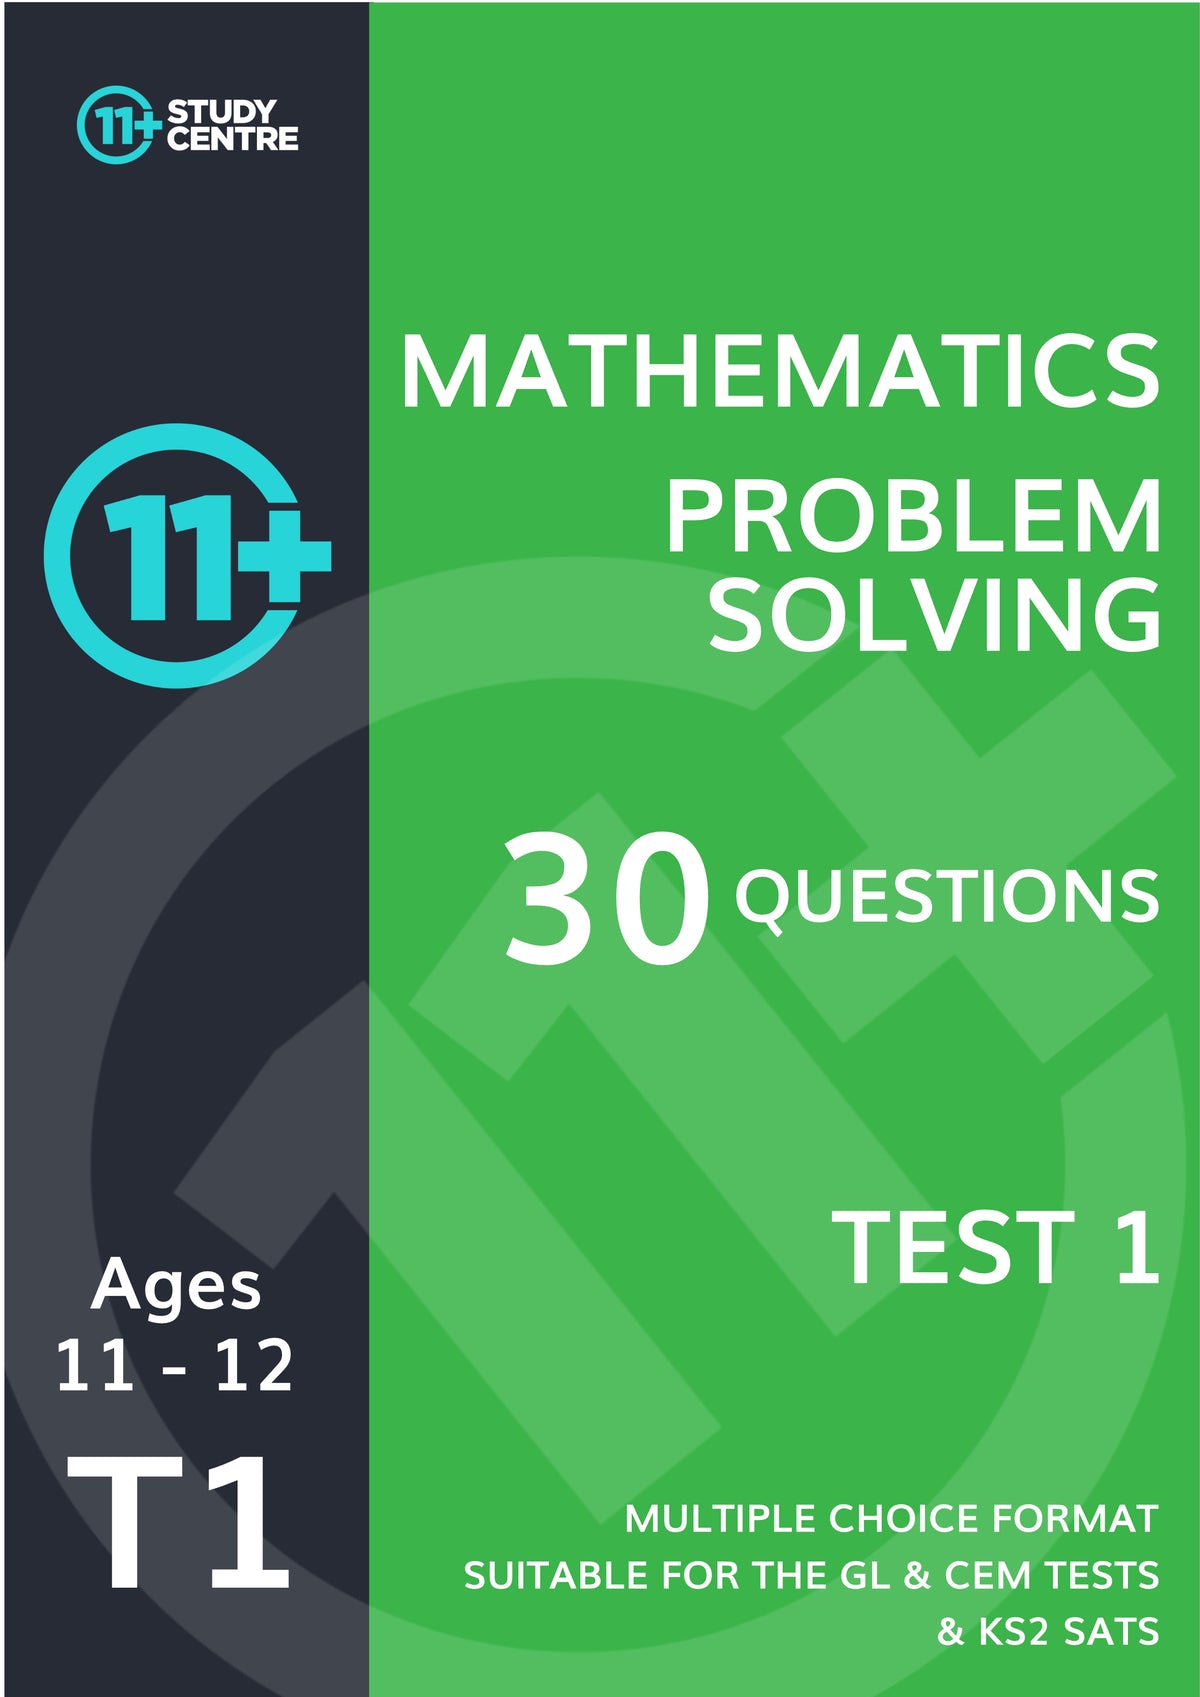 11-plus-maths-problem-solving-test-helps-with-11-plus-entrance-exams